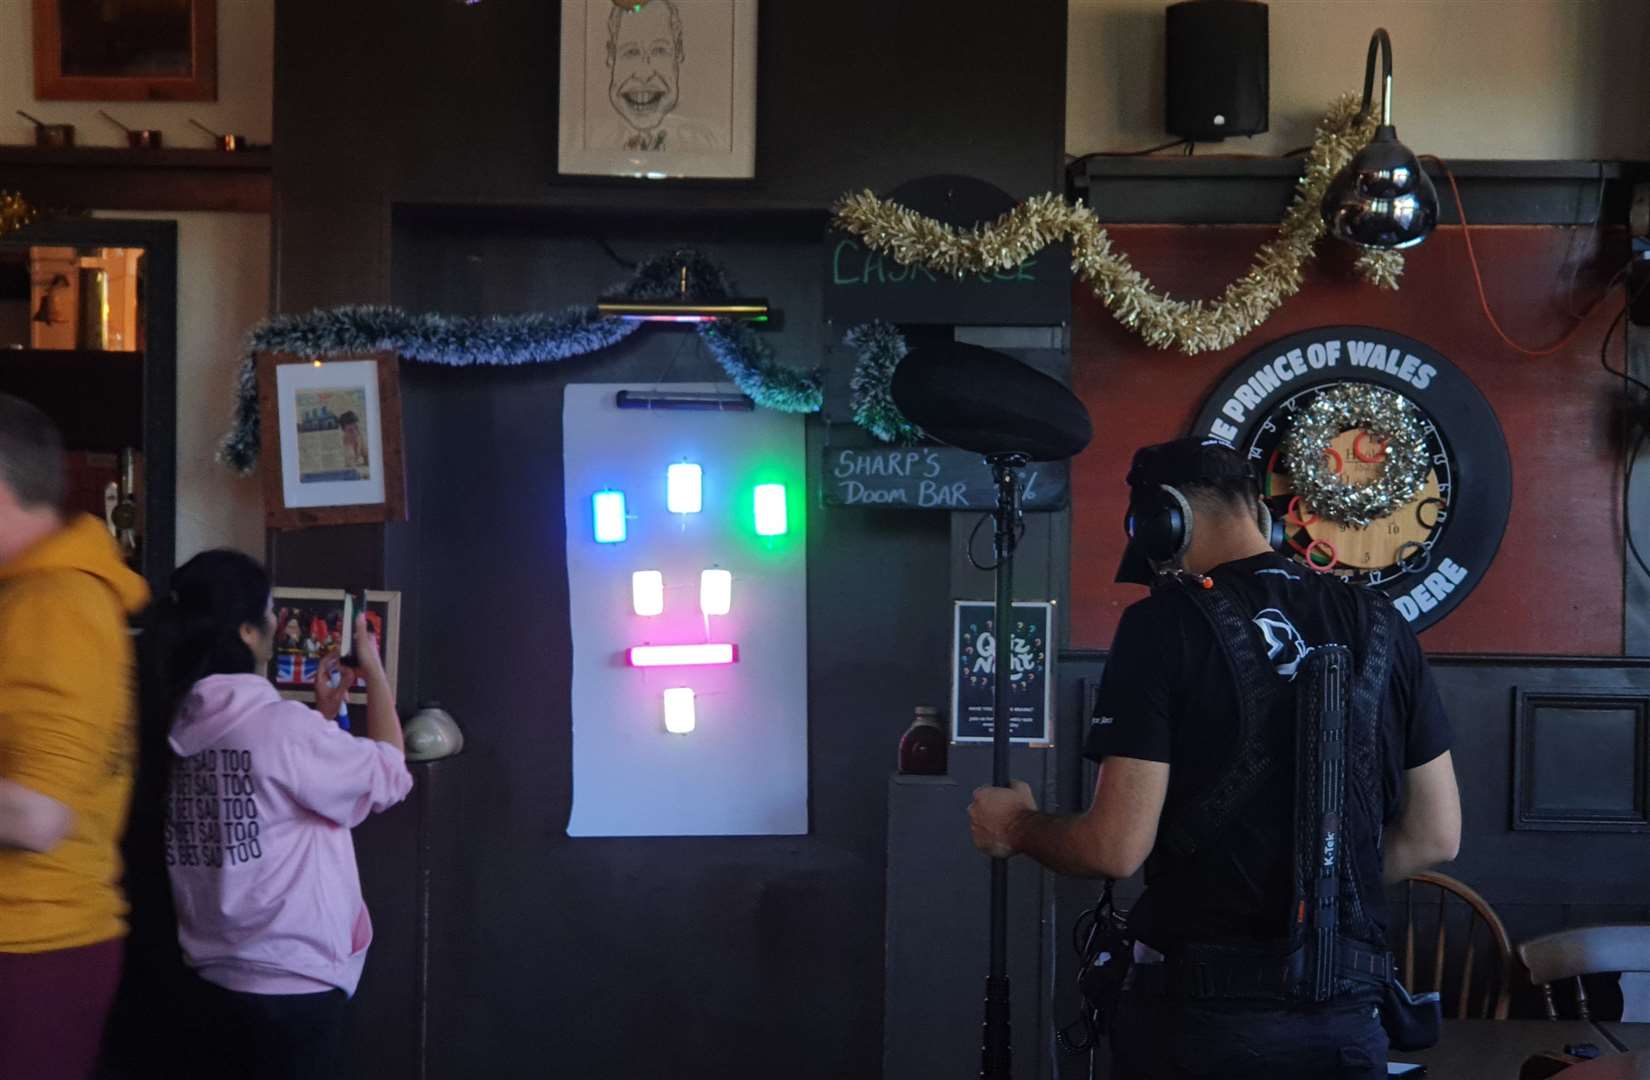 Peter created a makeshift fruit machine using coloured lights stuck in an alcove at the Prince of Wales pub